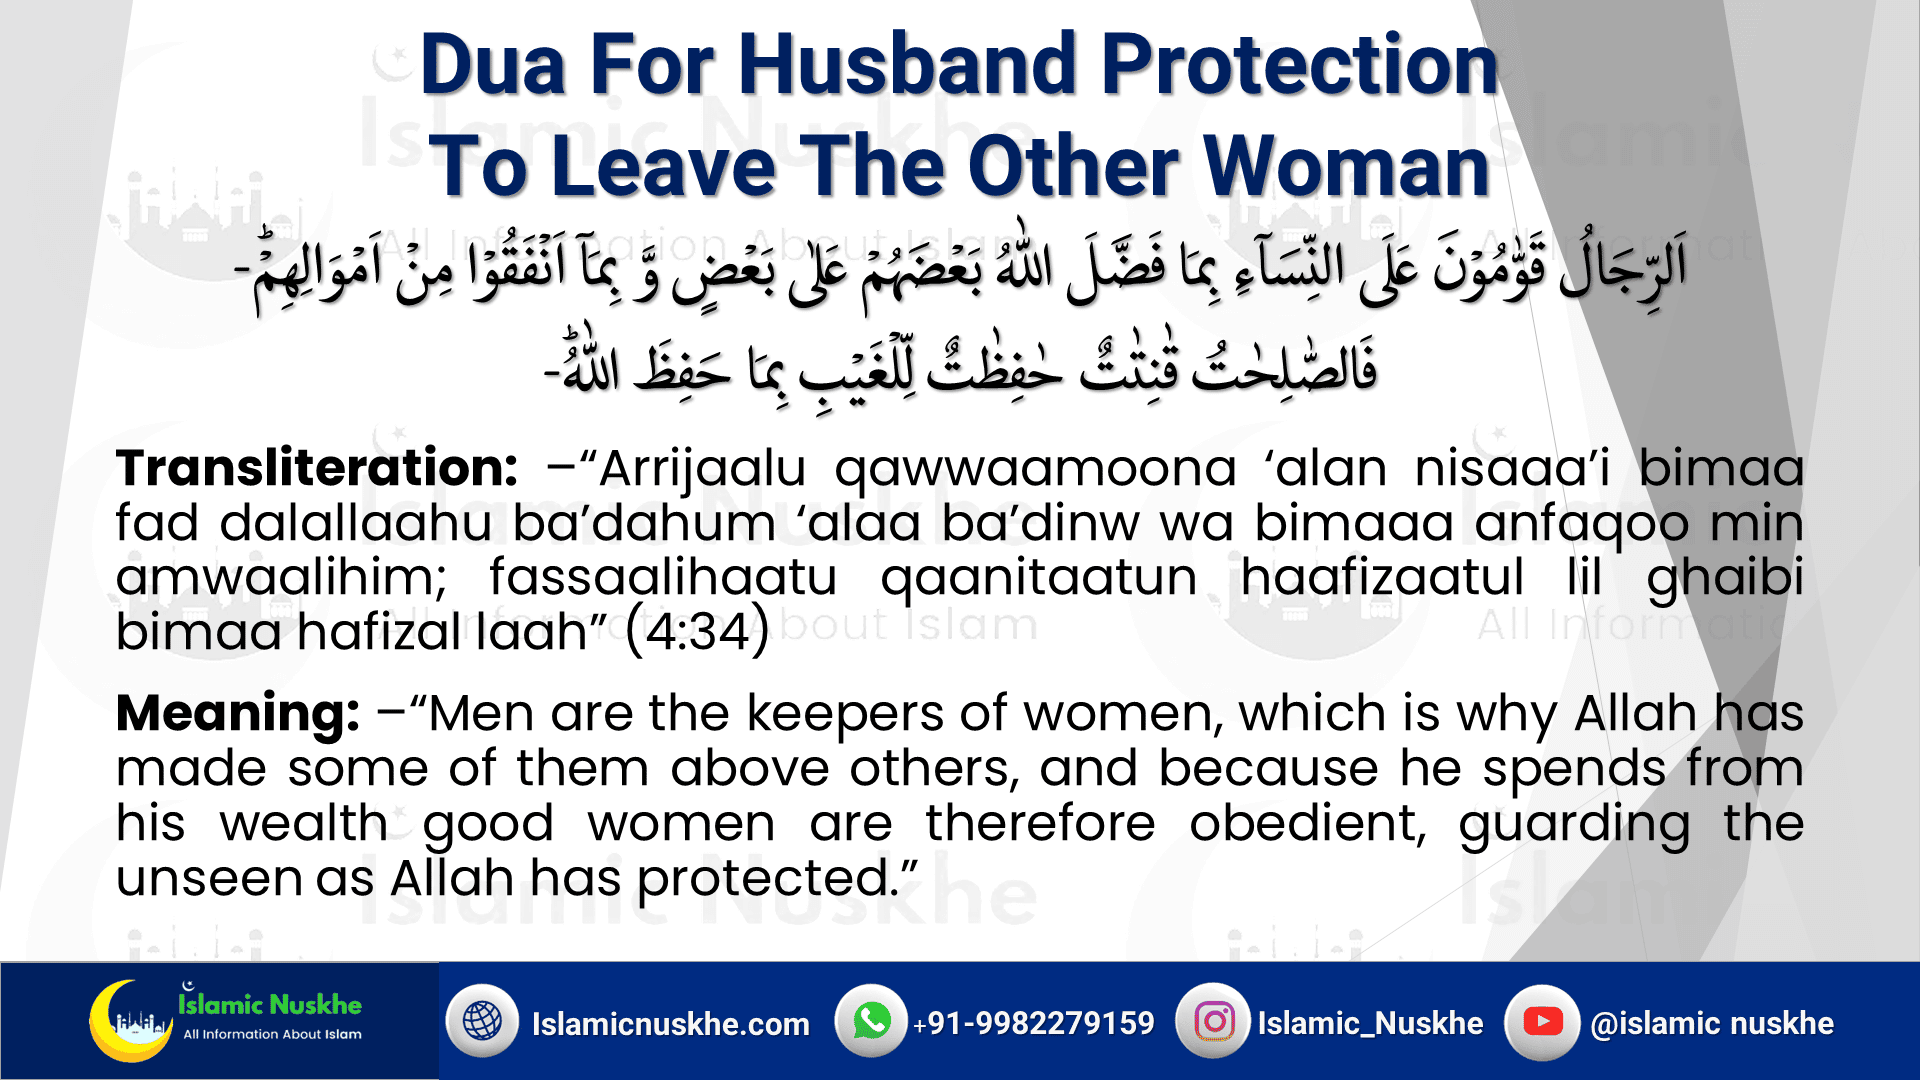 Dua For Husband Protection To Leave The Other Woman